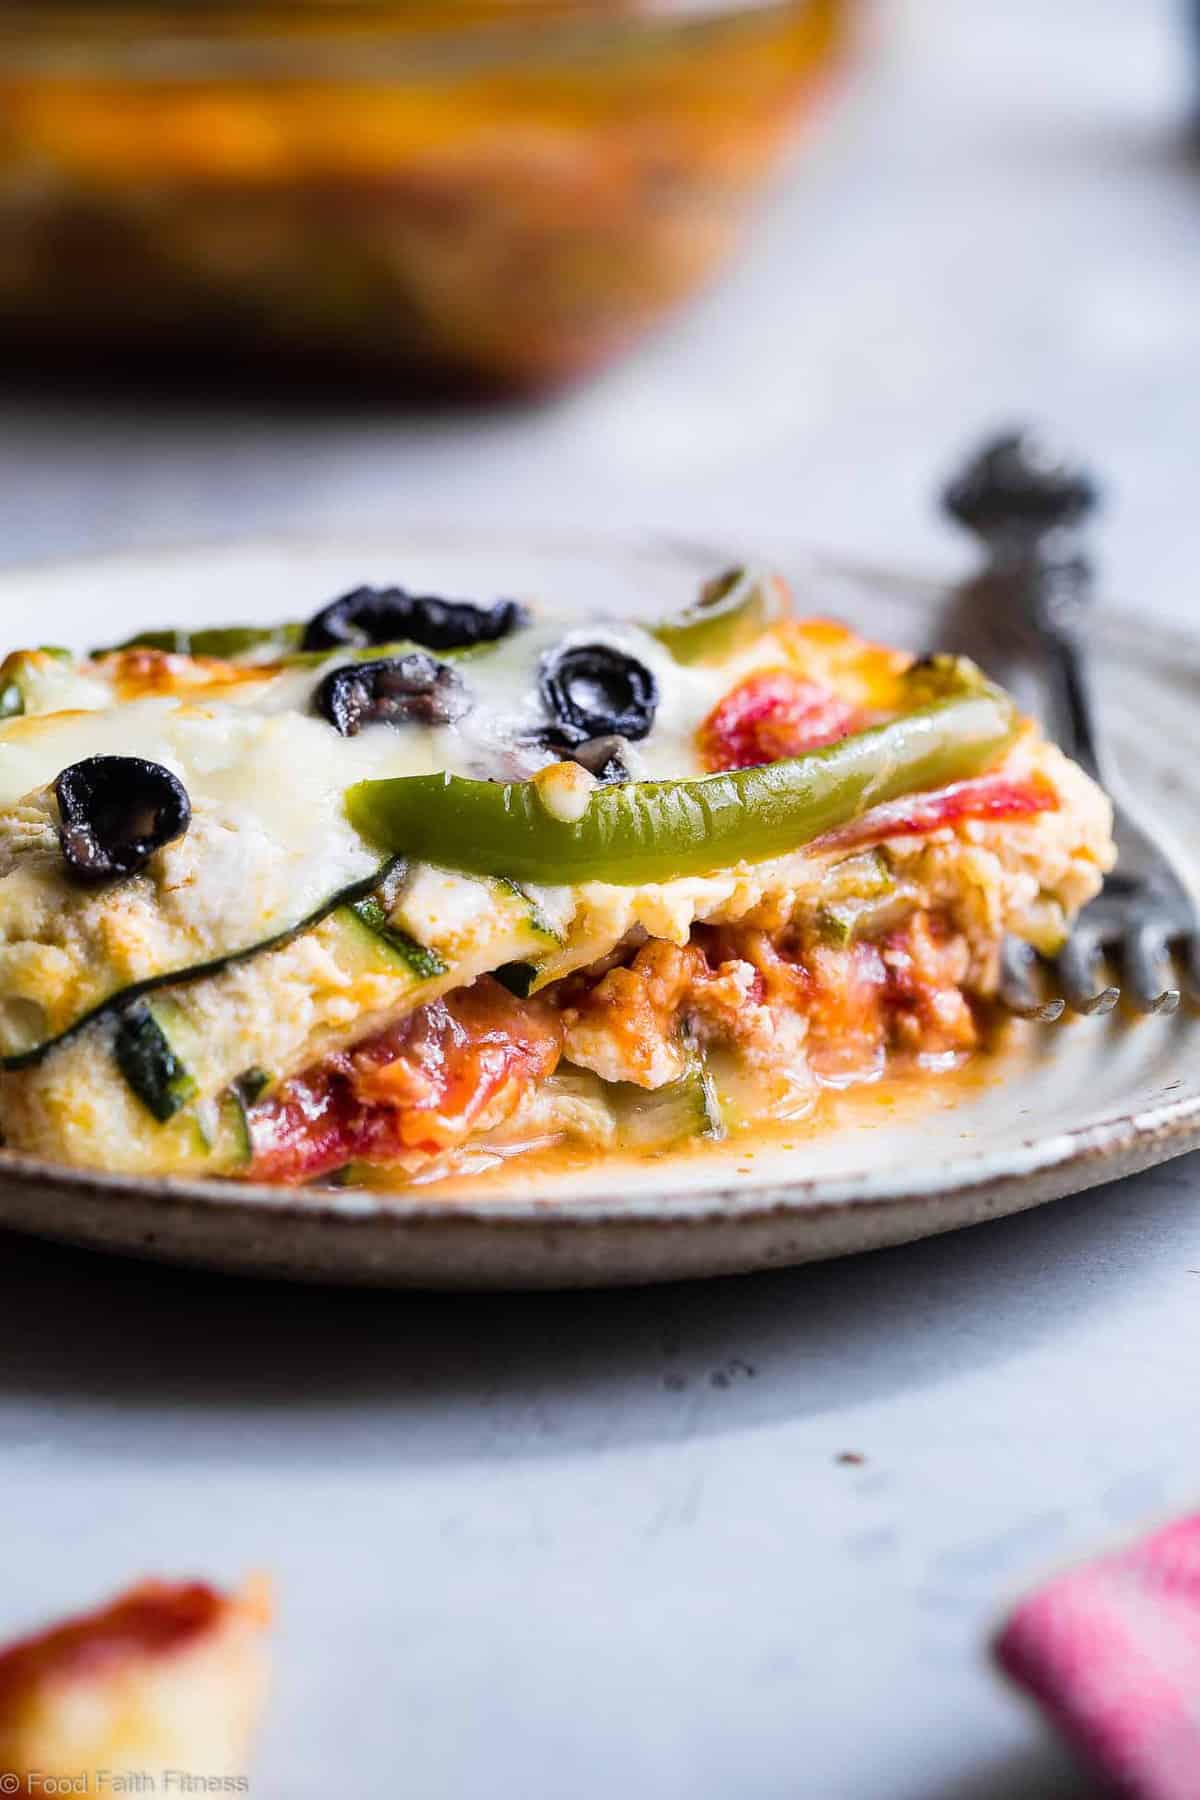 Low Carb Zucchini Pizza Lasagna - This zucchini lasagna combines 2 classic comfort foods into one healthy and kid friendly dinner! Gluten free, under 300 calories and packed with protein too! | #Foodfaithfitness.com | #Glutenfree #Lowcarb #Healthy #KidFriendly #Lasagna